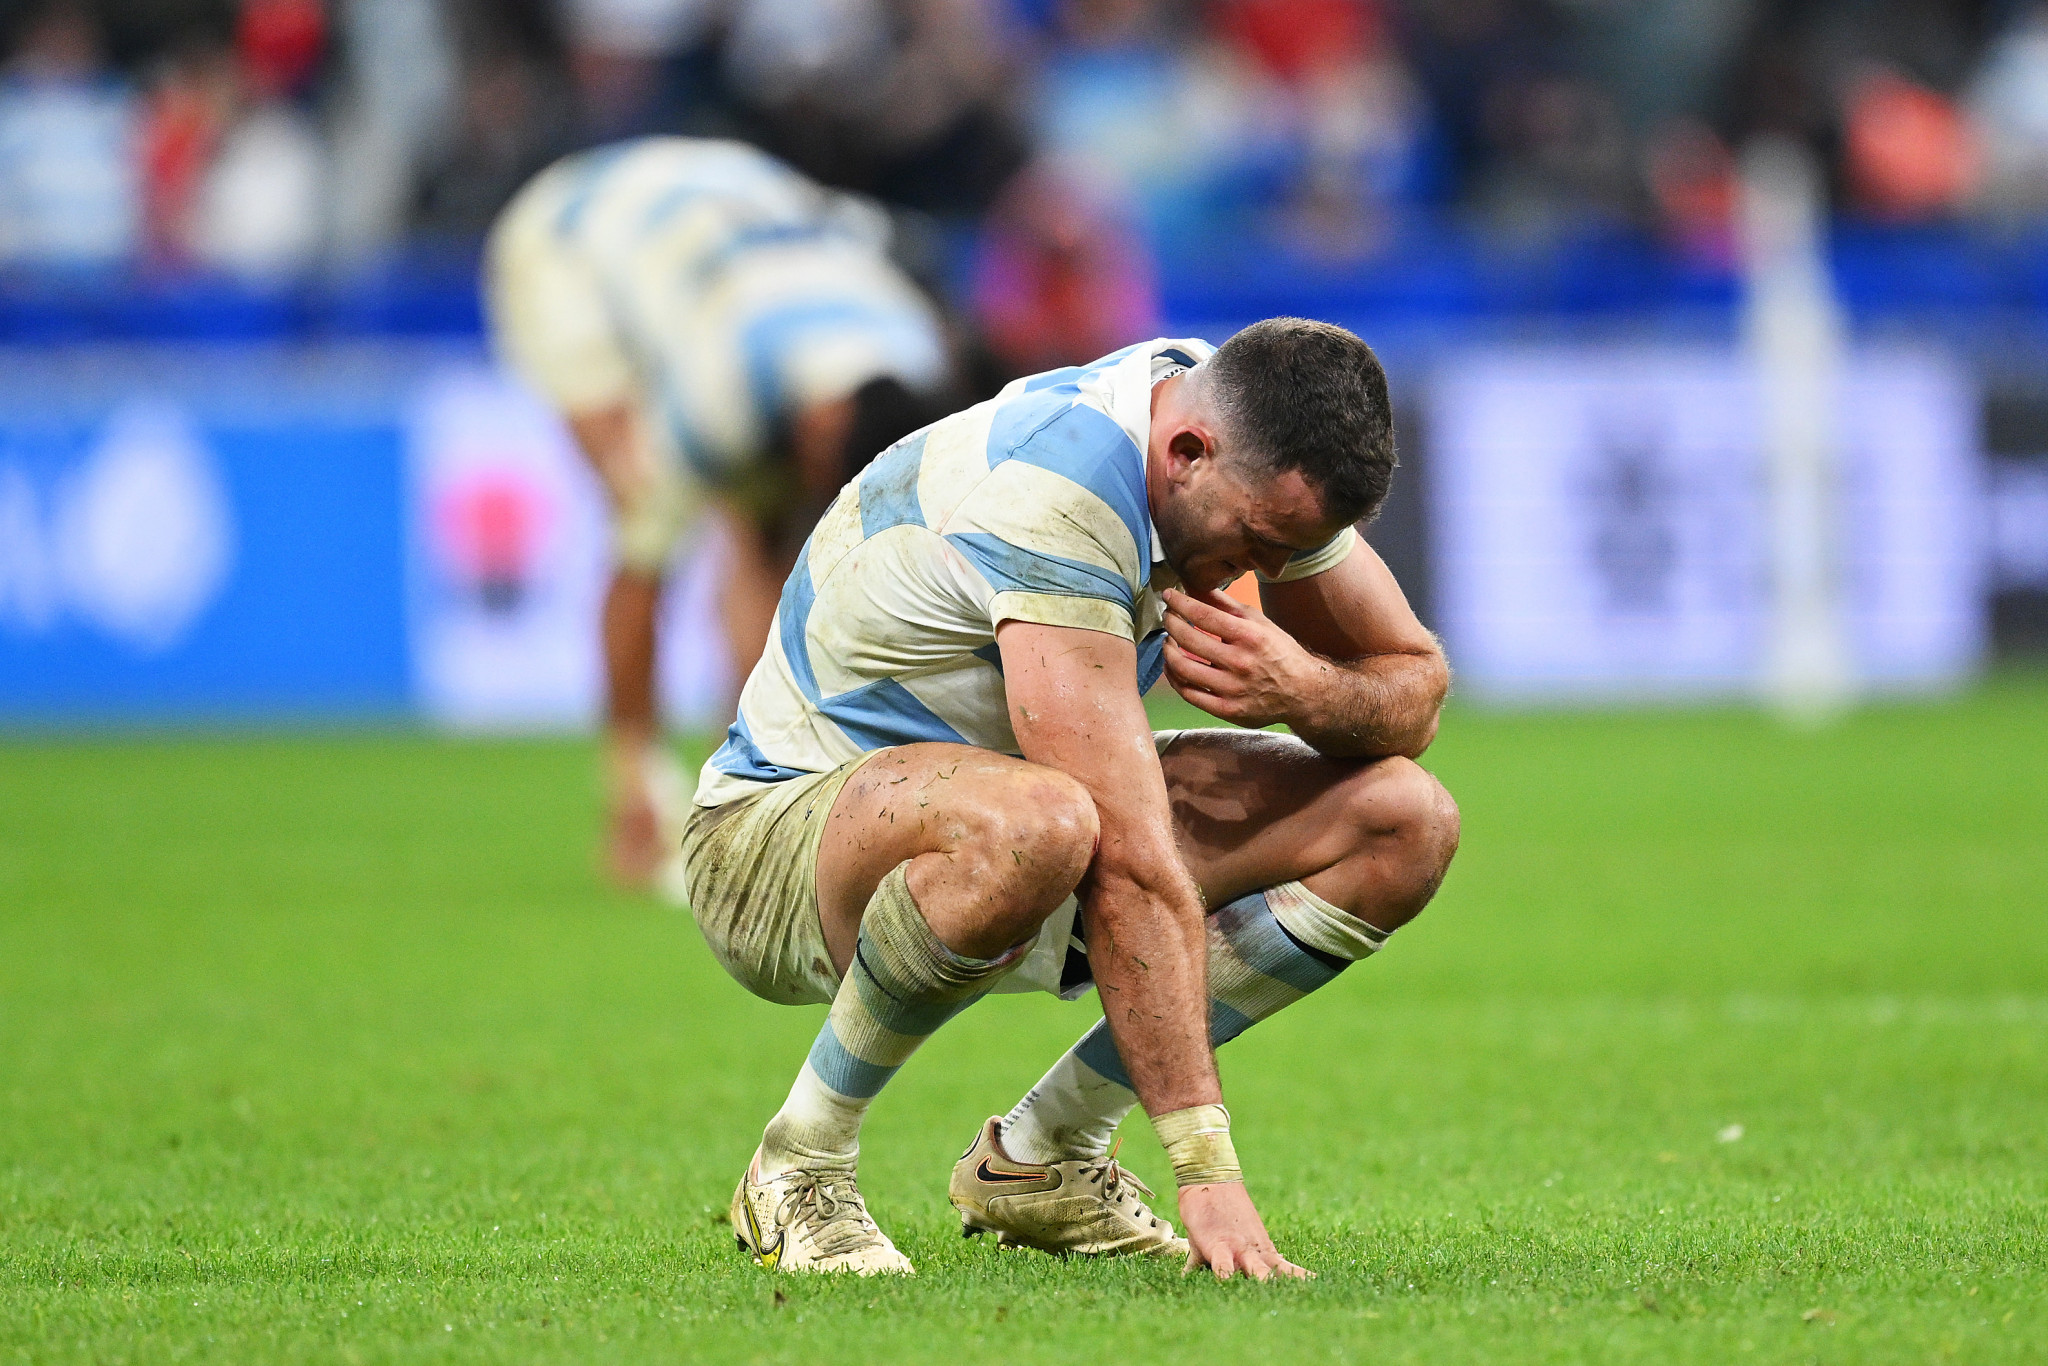 Argentina's 44-6 defeat was the second heaviest semi-final loss in Rugby World Cup history ©Getty Images